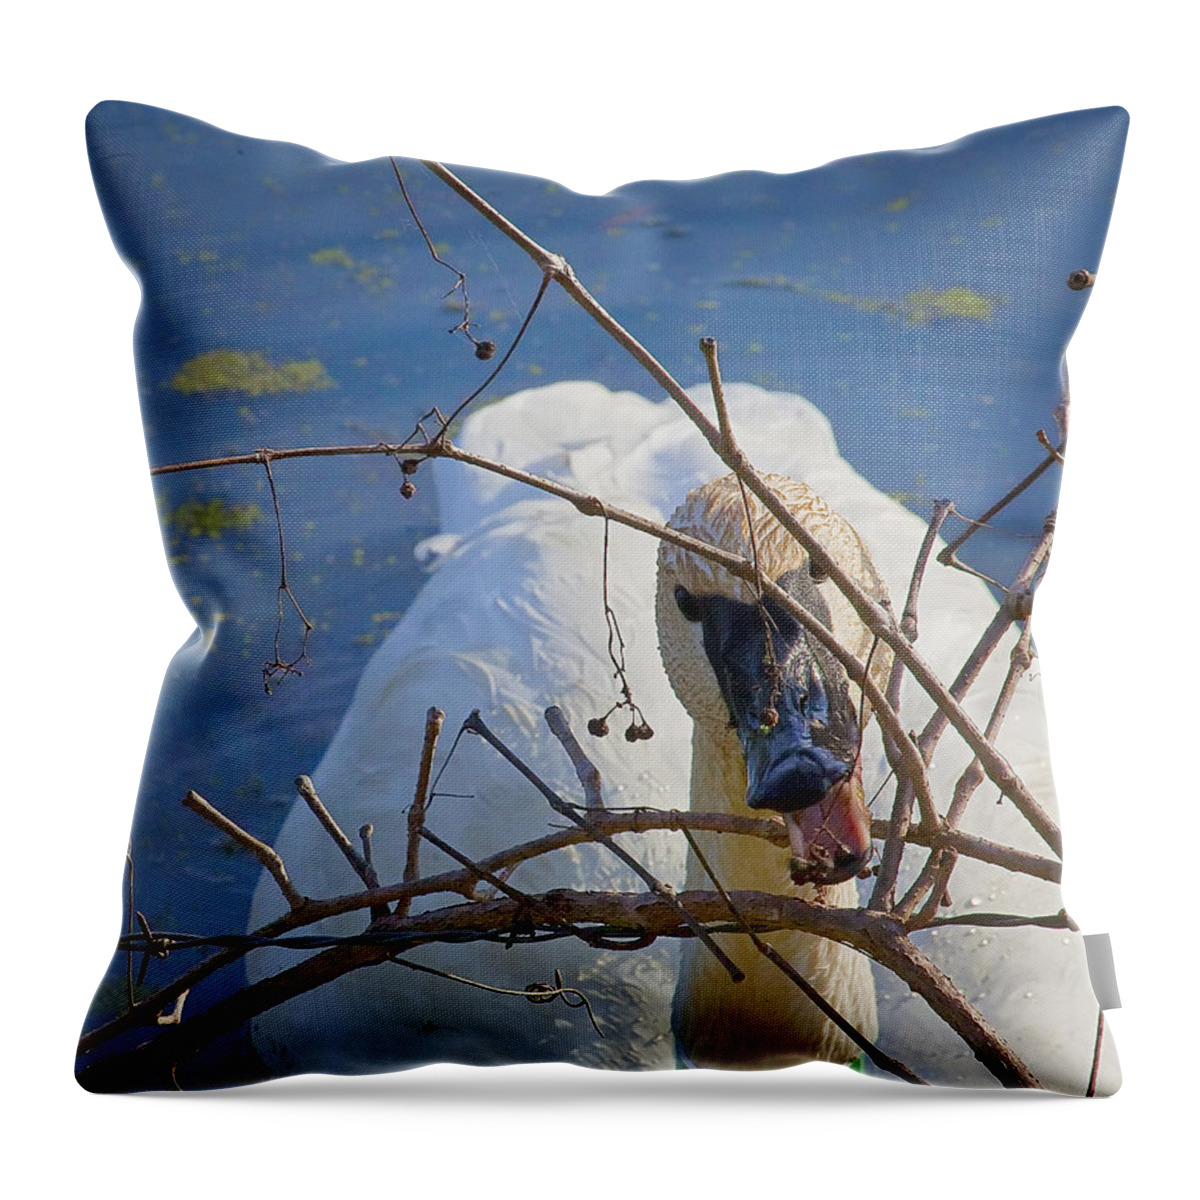 Trumpeter Swan Throw Pillow featuring the photograph Trumpeter Swan Eating by Michael Dougherty